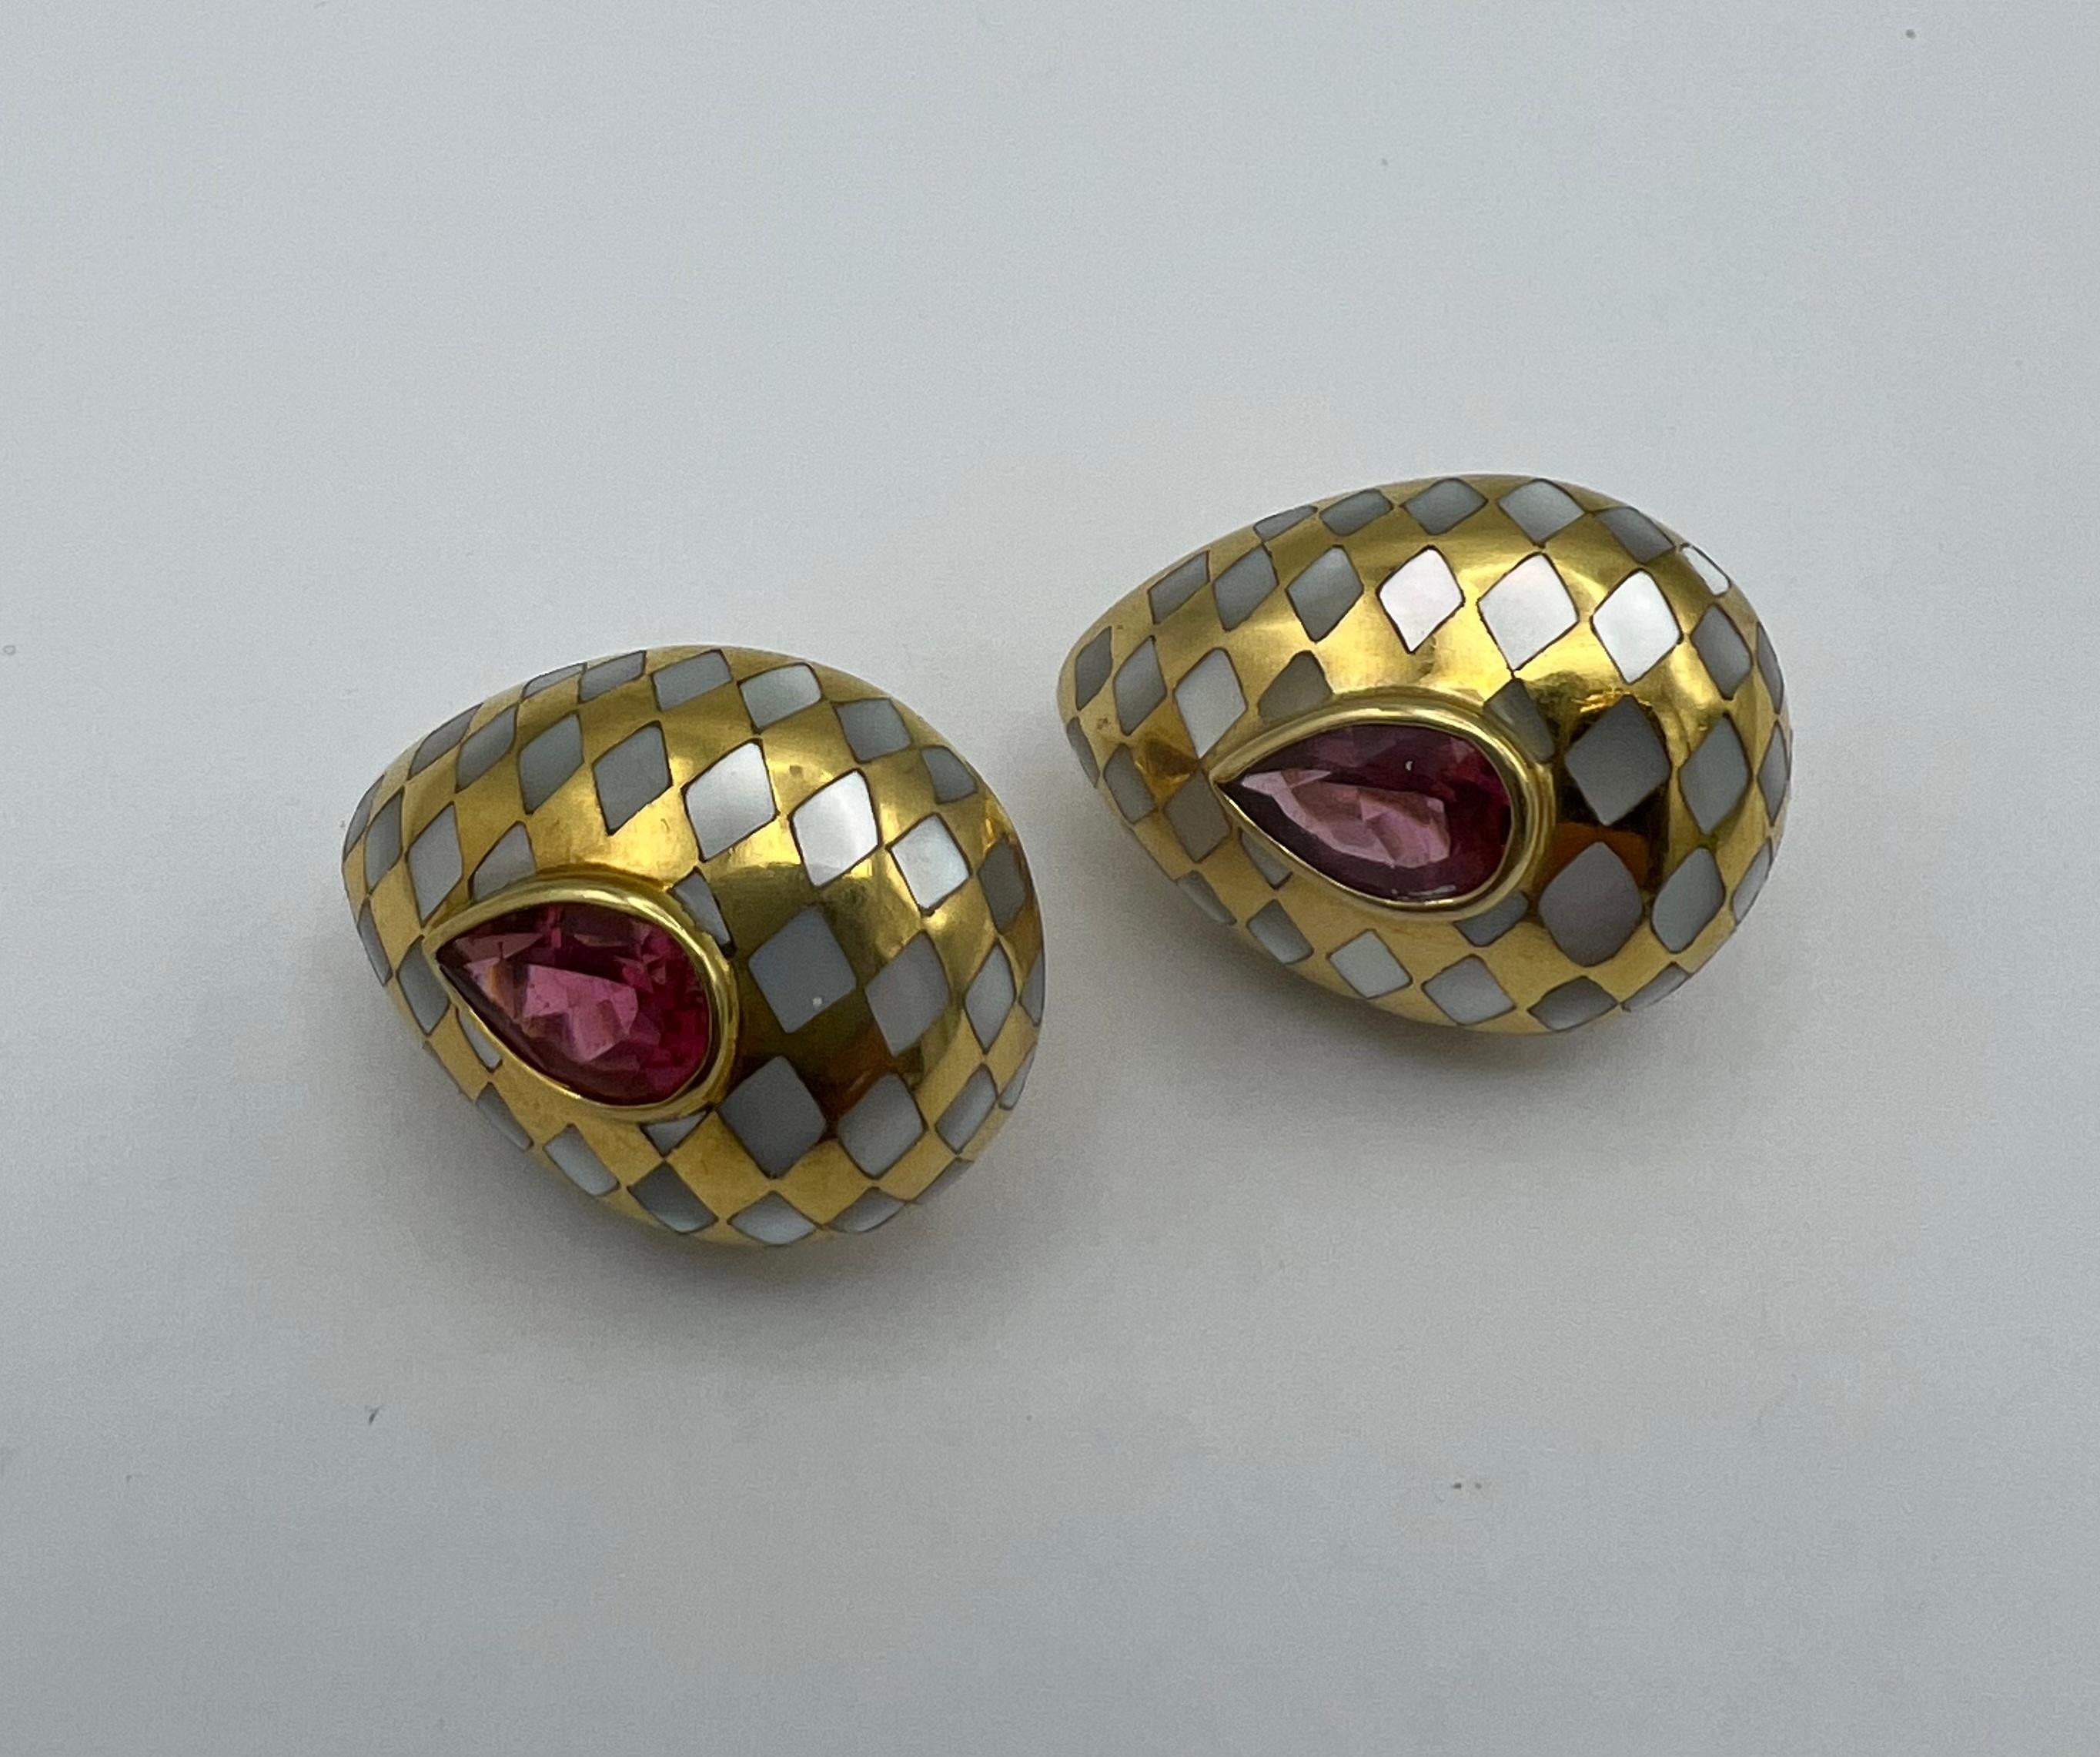 Vintage Angela Cummings Inlayed Pearl, Pink Tourmaline & 18k Gold Earrings In Excellent Condition For Sale In Beverly Hills, CA